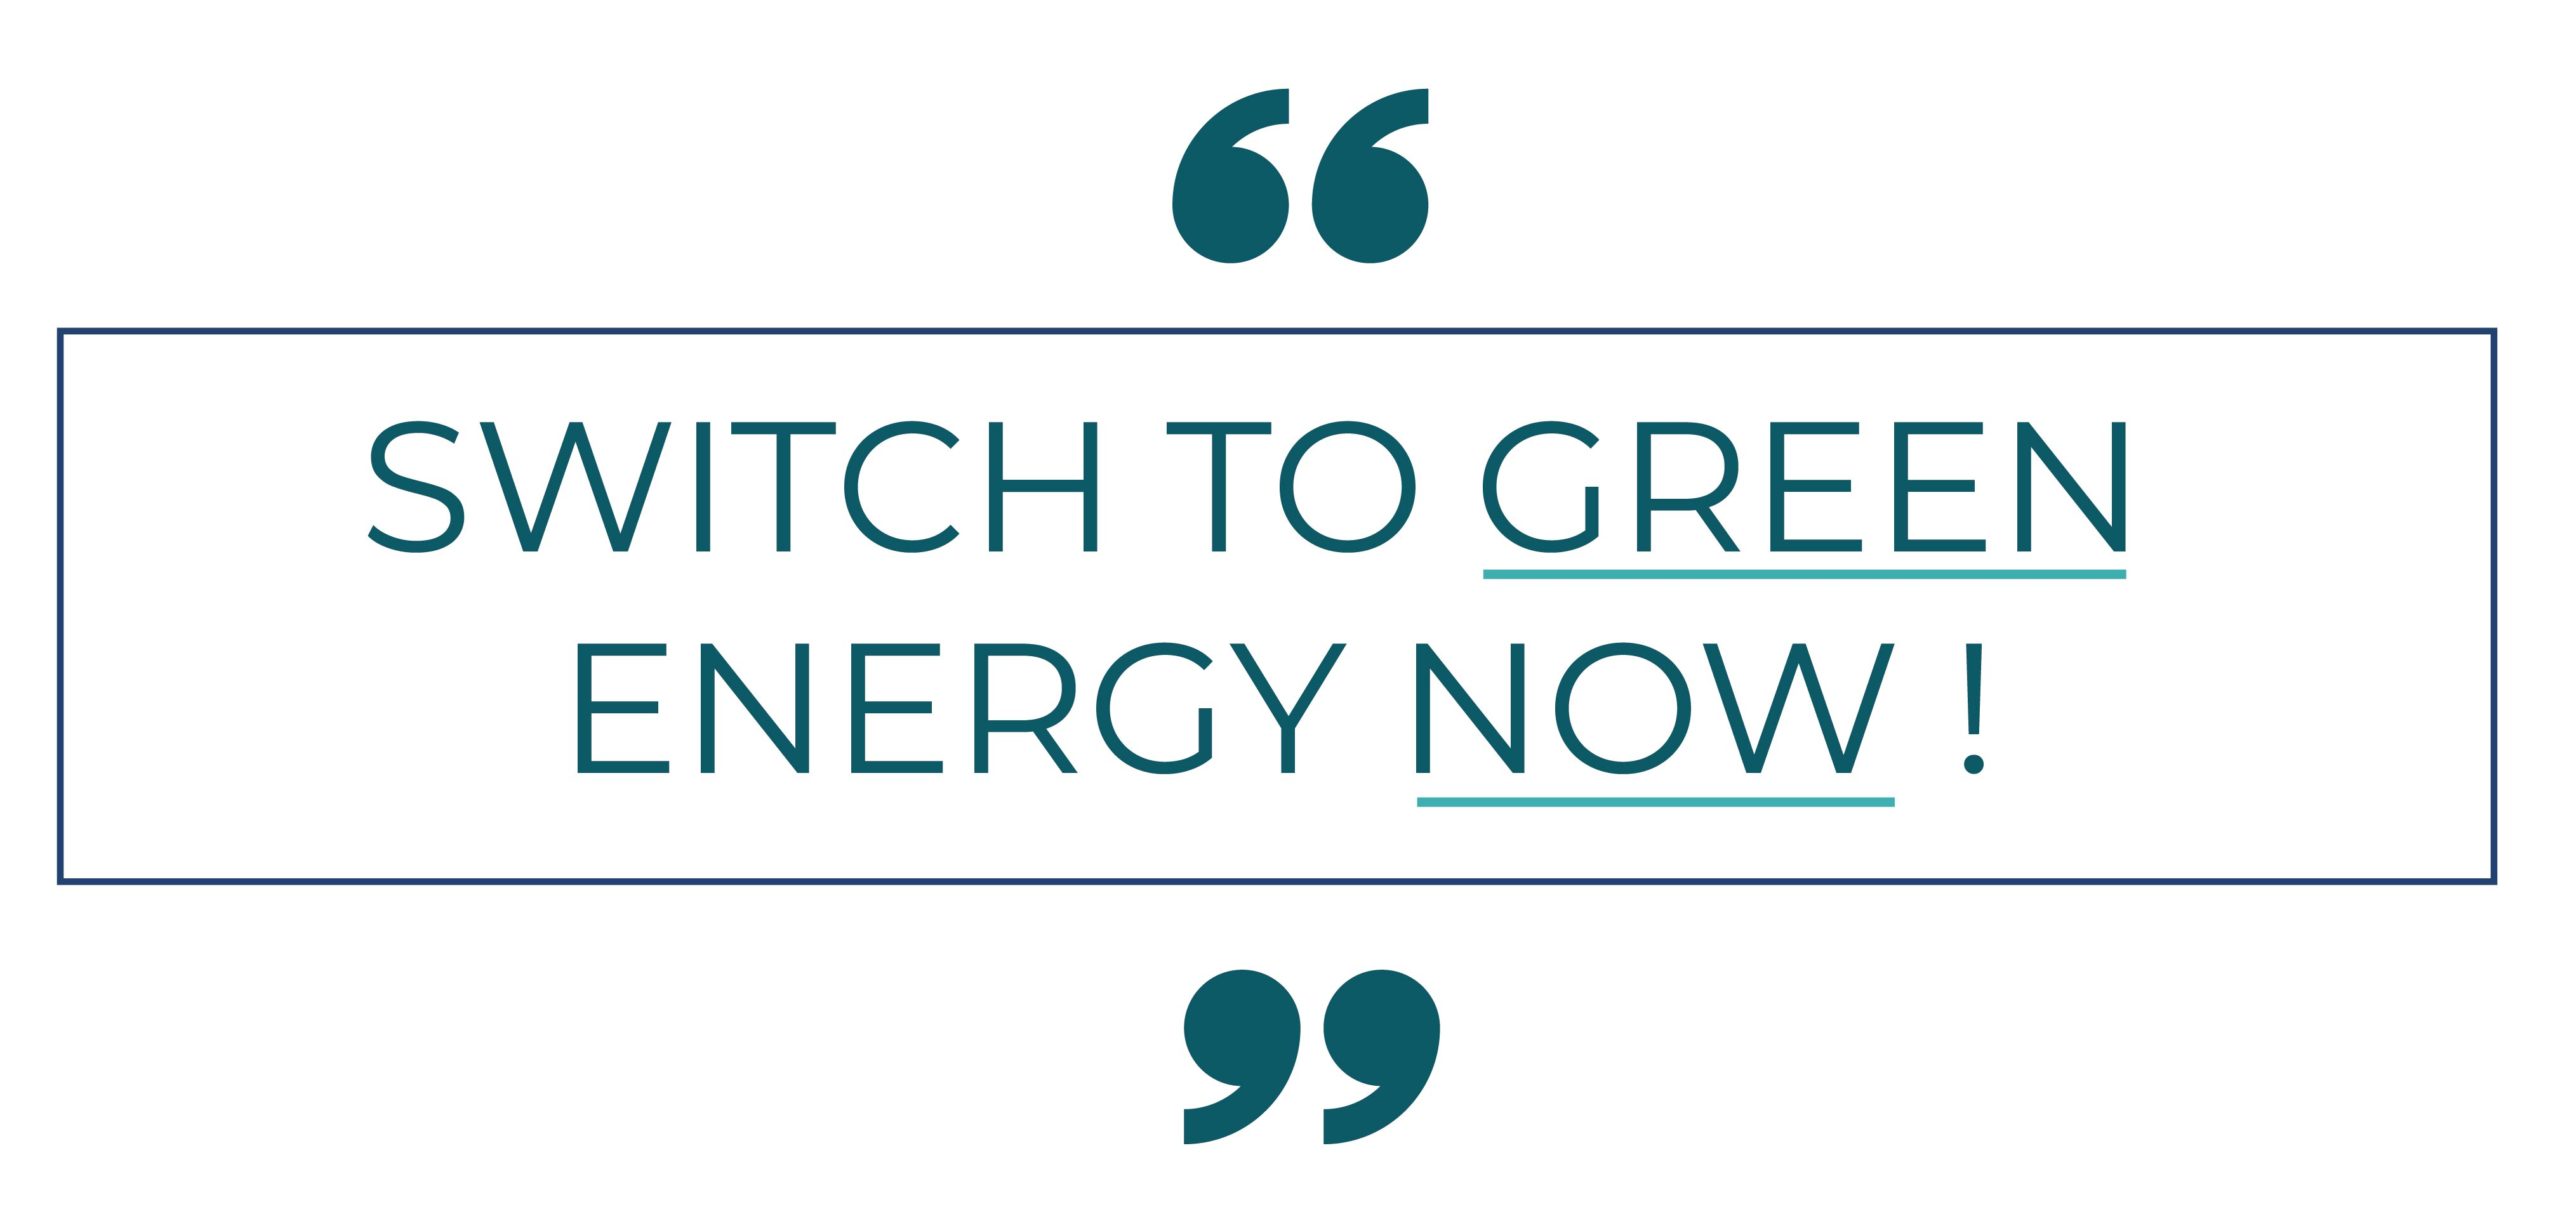 Green energy & Right to clean air quote